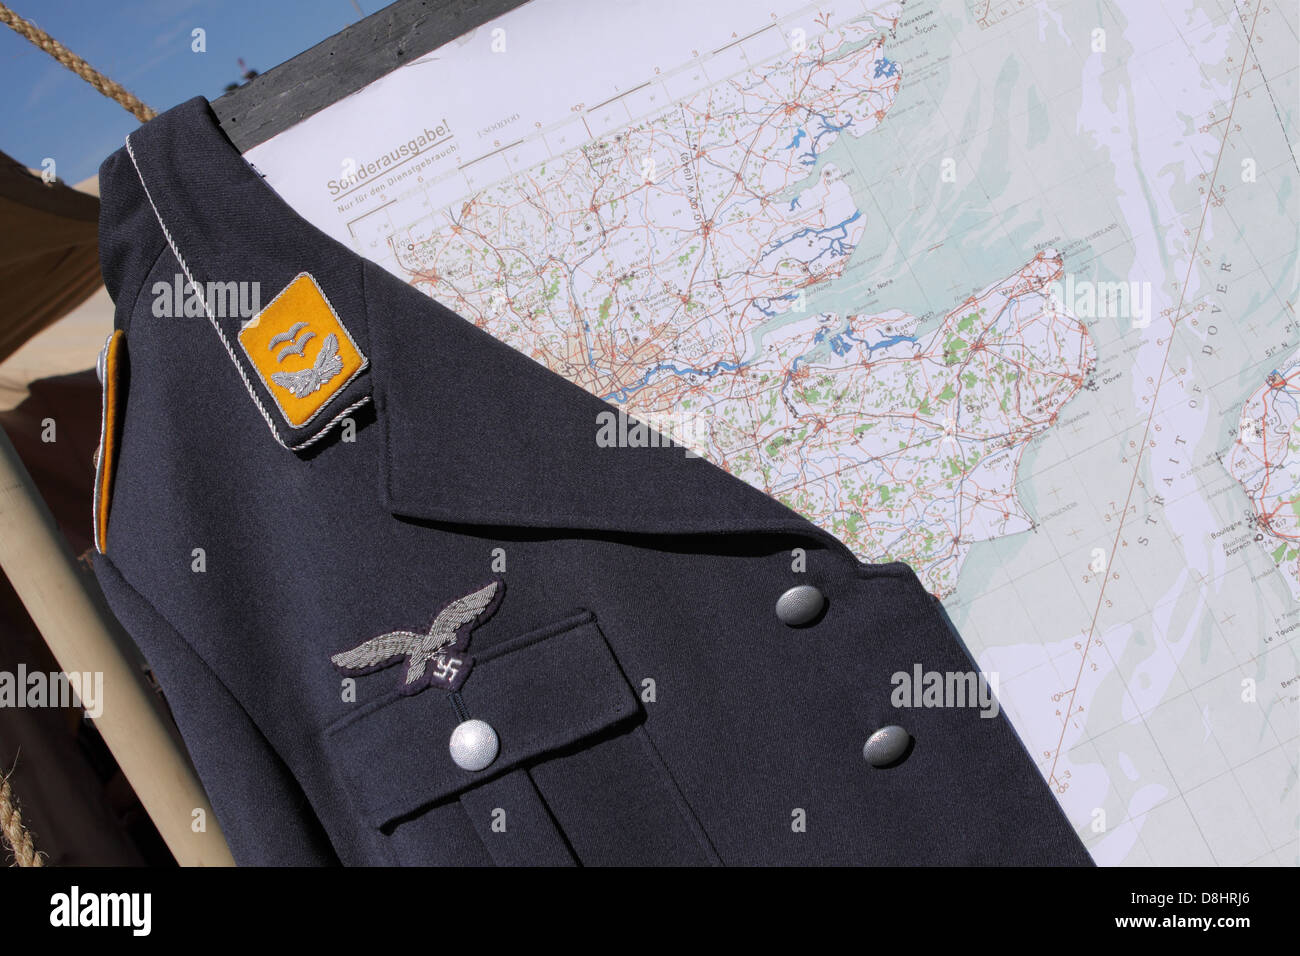 Luftwaffe WW2 jacket hanging over a German map of England and the English Channel Stock Photo